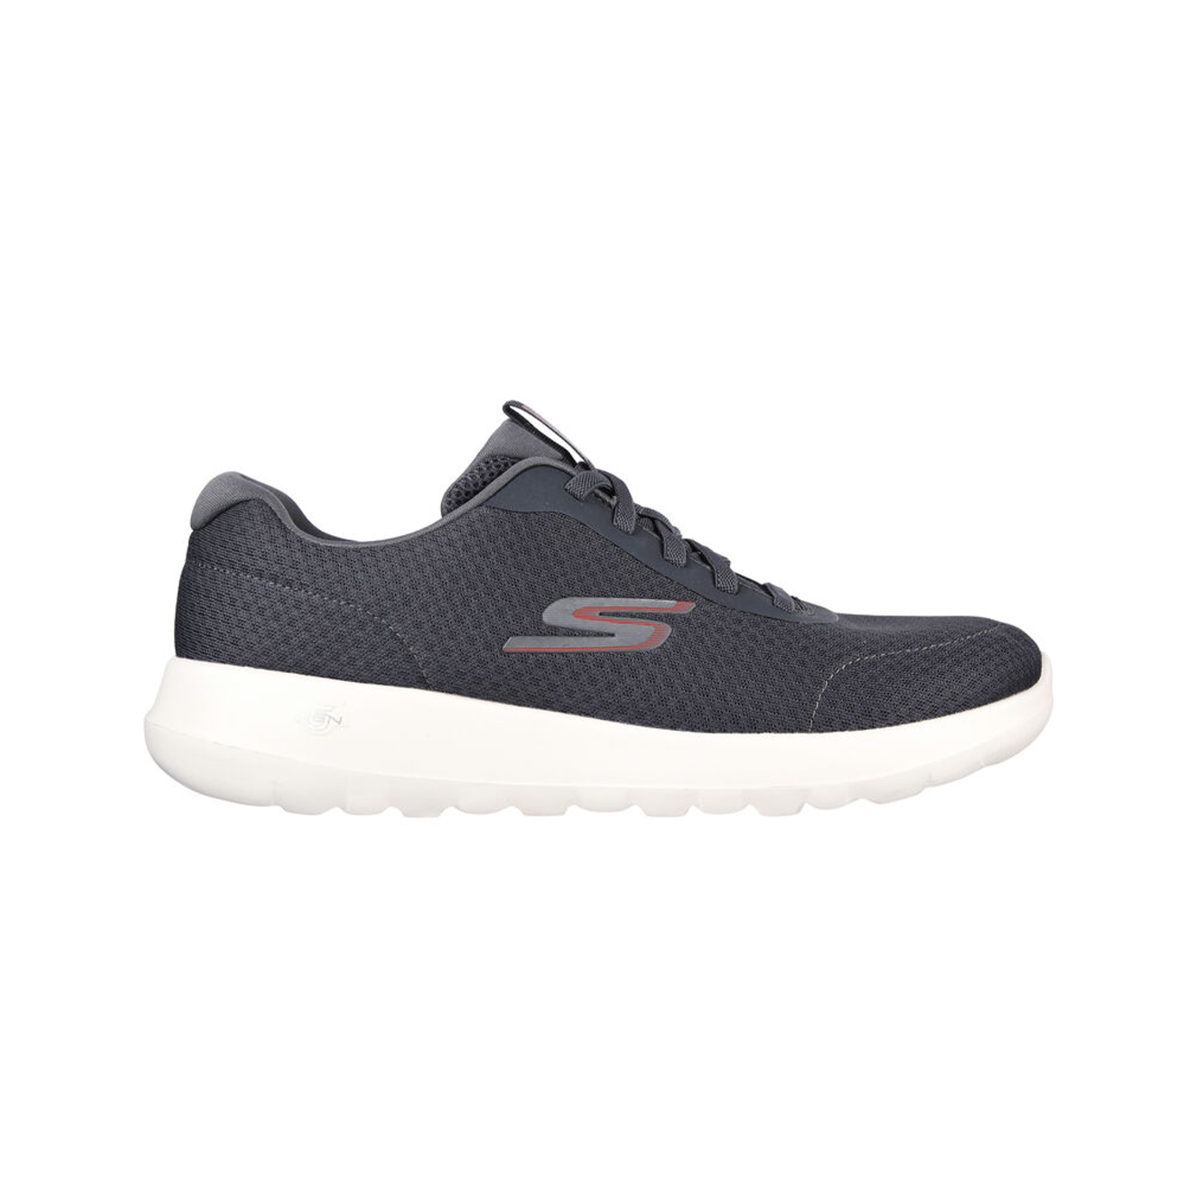 Skechers Go Walk Max Midshore Shoes For Men, Charcoal & Red